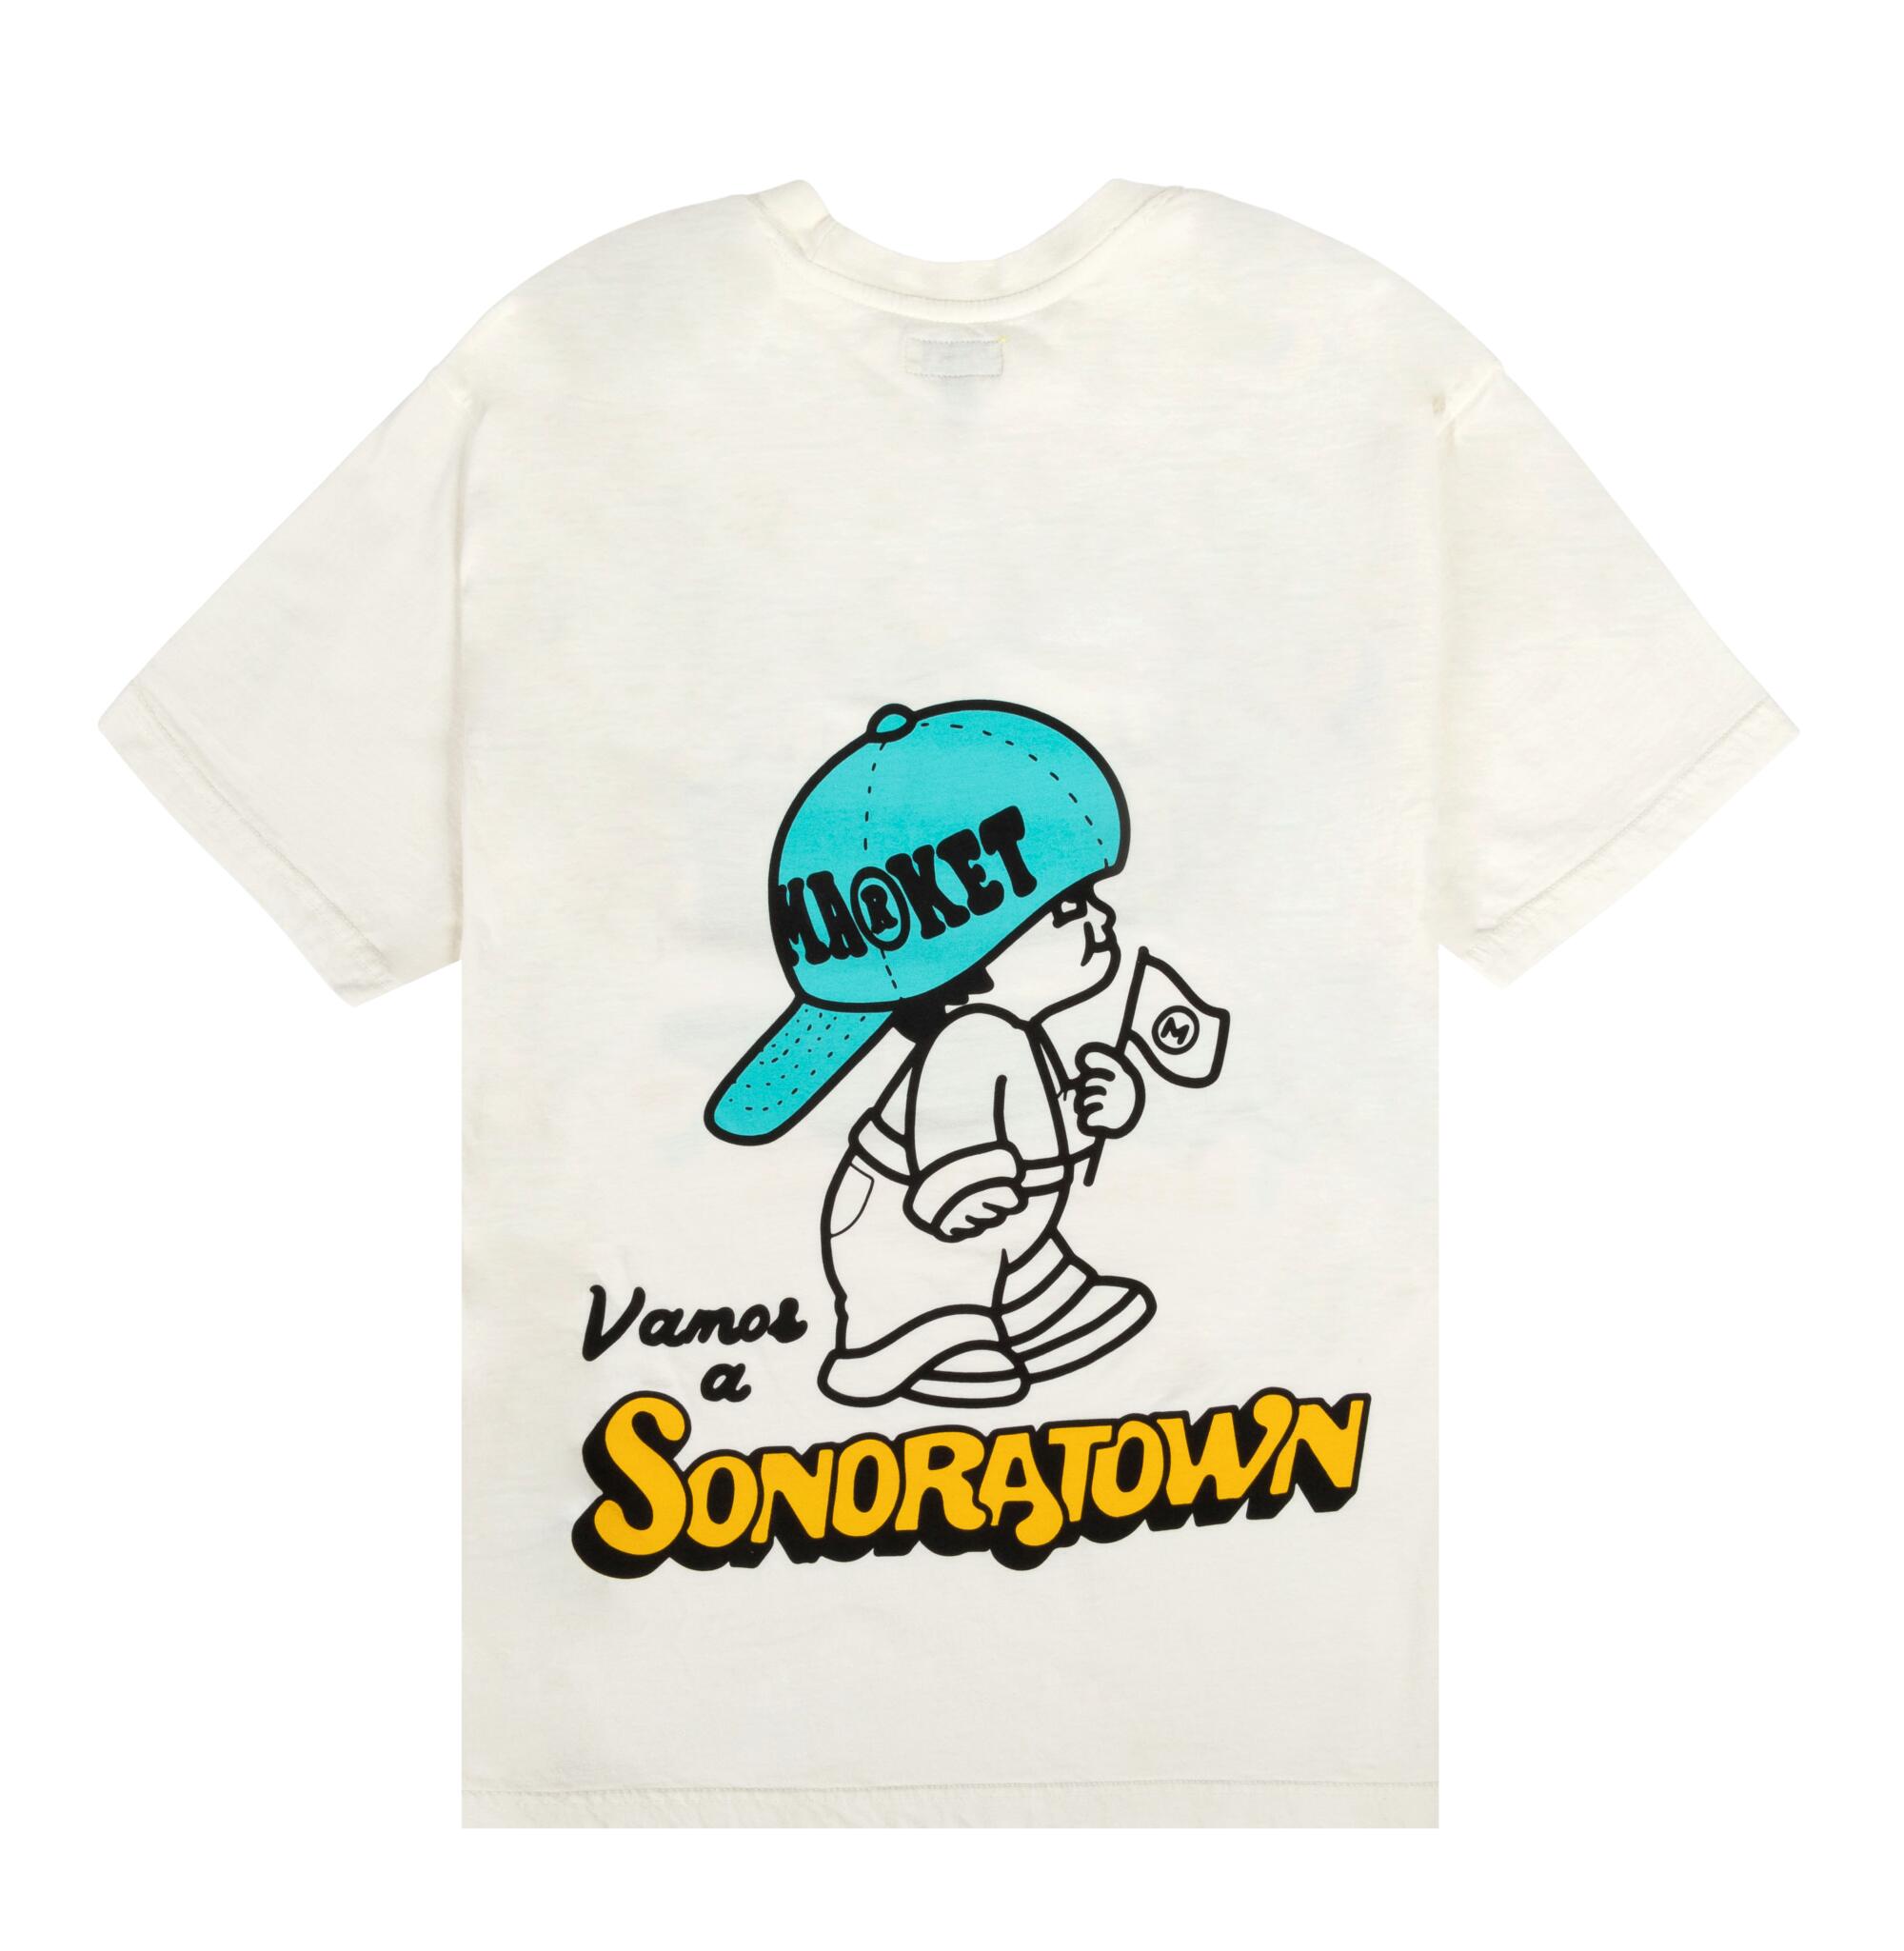 Sonoratown T-shirt